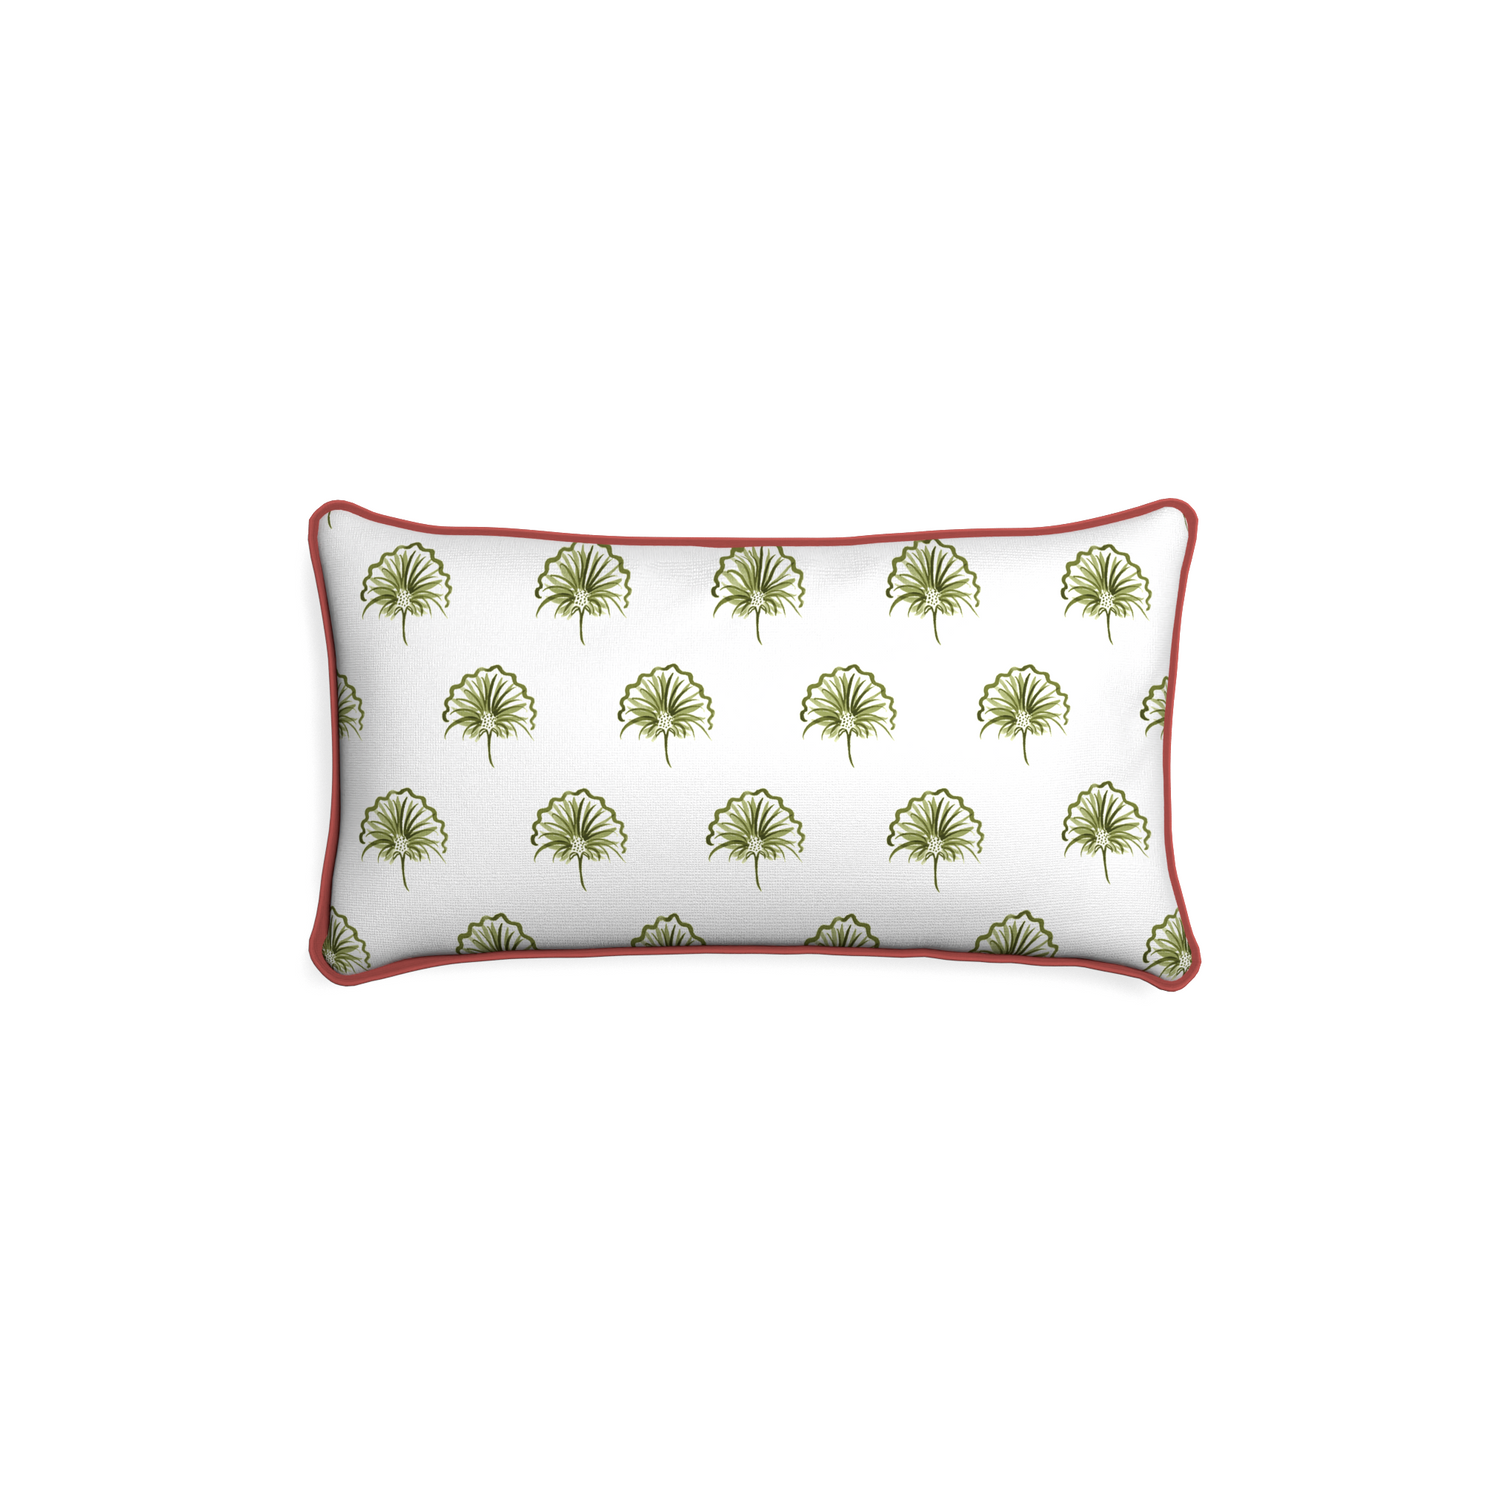 Petite-lumbar penelope moss custom green floralpillow with c piping on white background